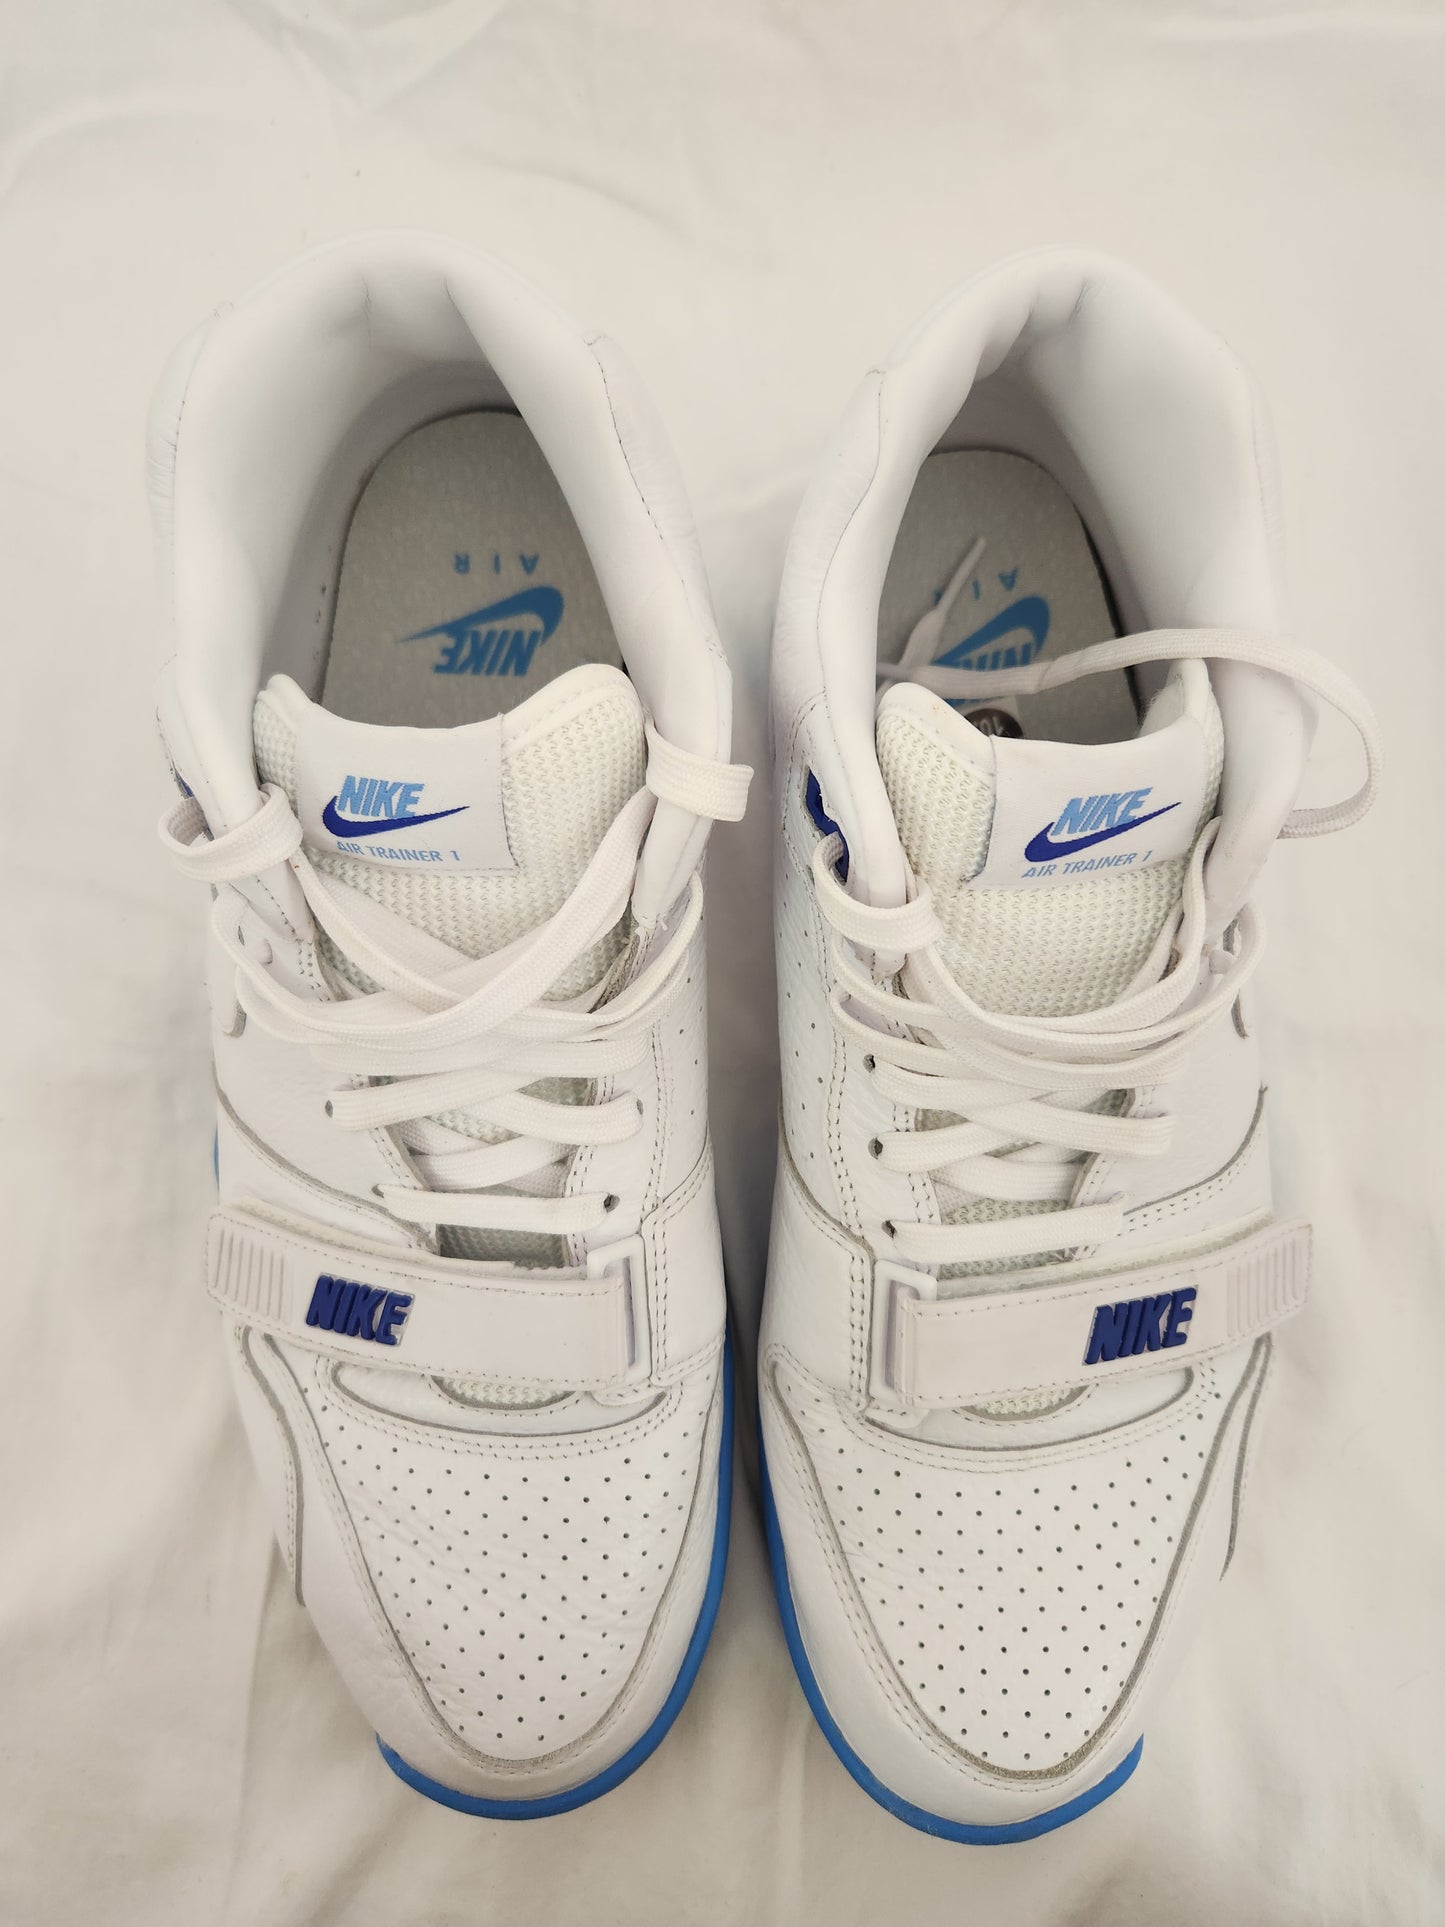 Nike Air Trainer 1 "Don't I Know You?" University White/Blue Sneakers - Size: 10.5